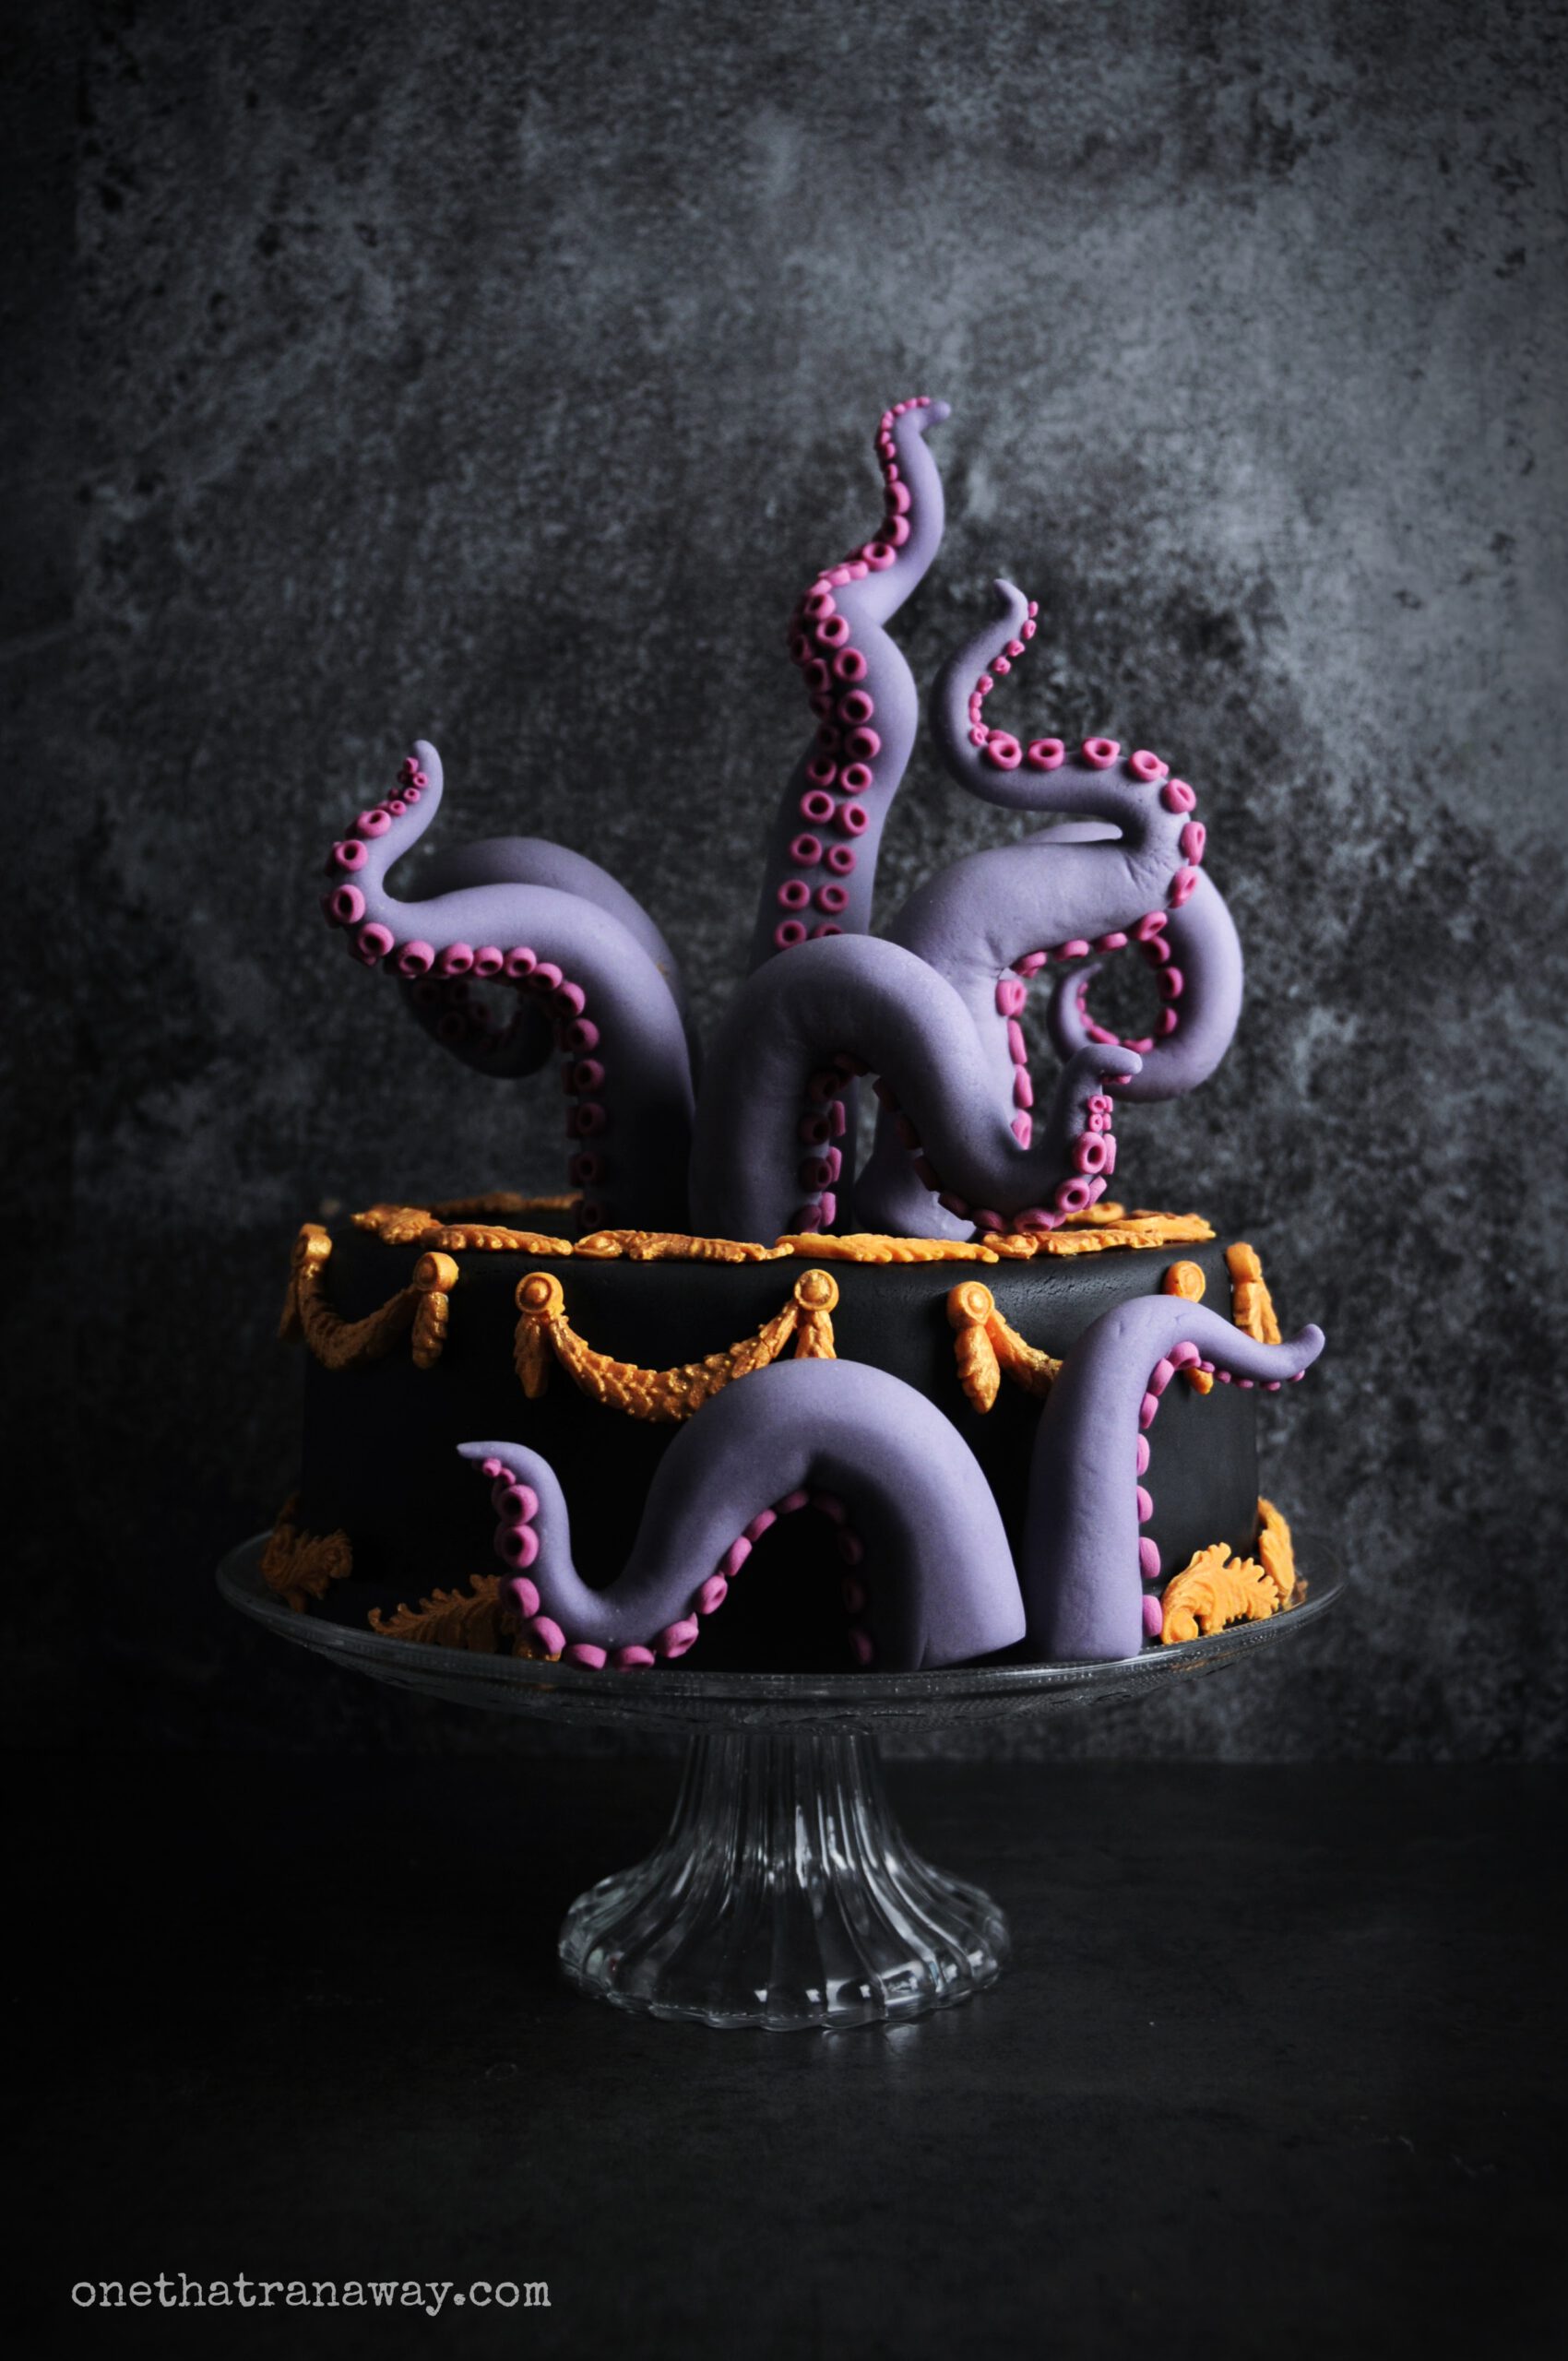 a black cake with purple fondant tentacles and gold ornaments on black background